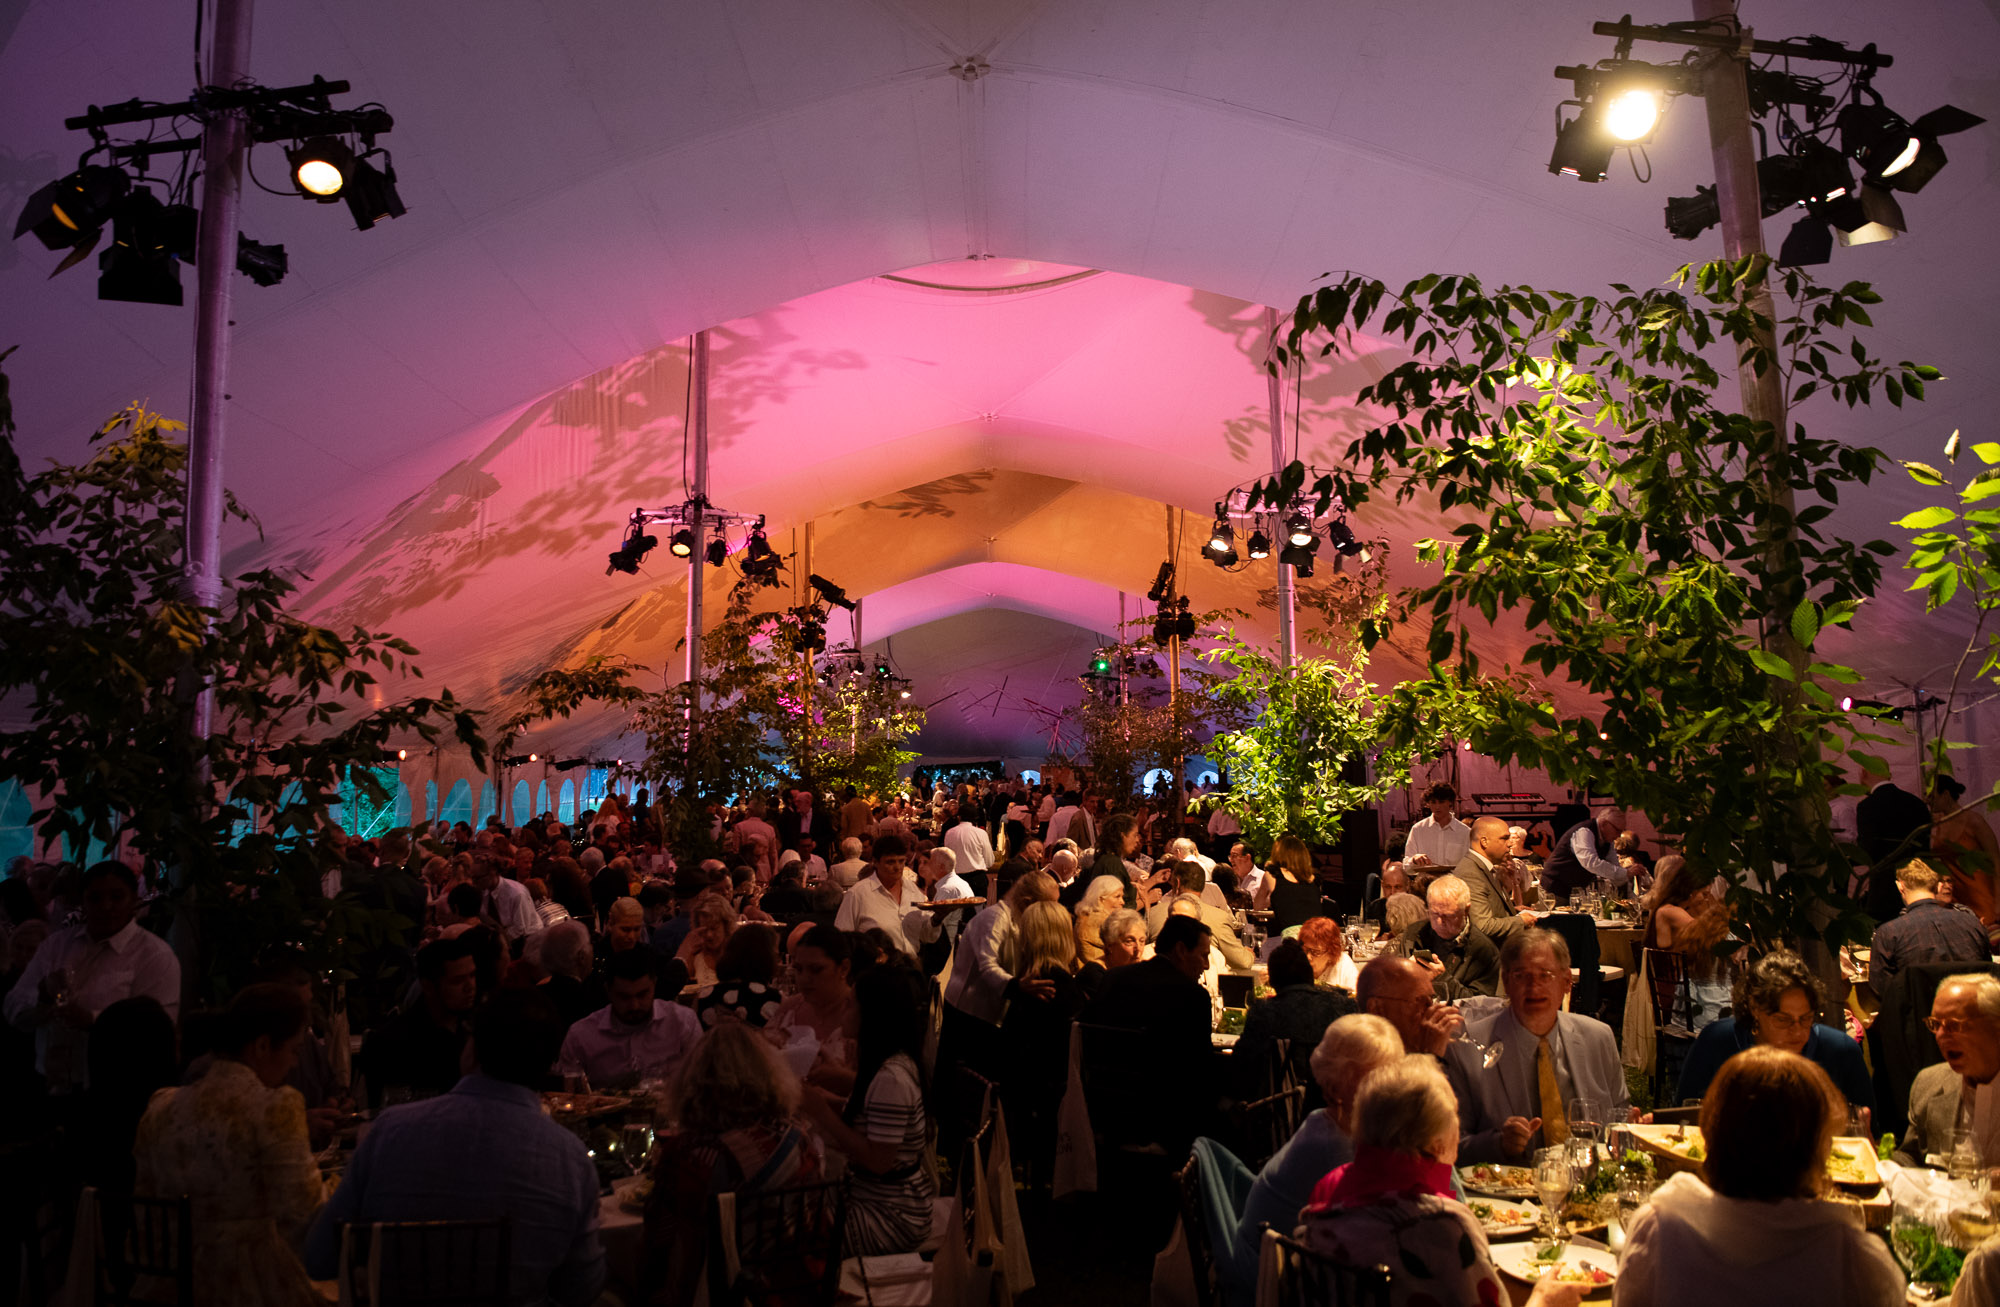 A photo of Jacob's Pillow Season Opening Gala. Gala attendees sit at round tables in a large tent lit with purple lighting and decorated with greenery.